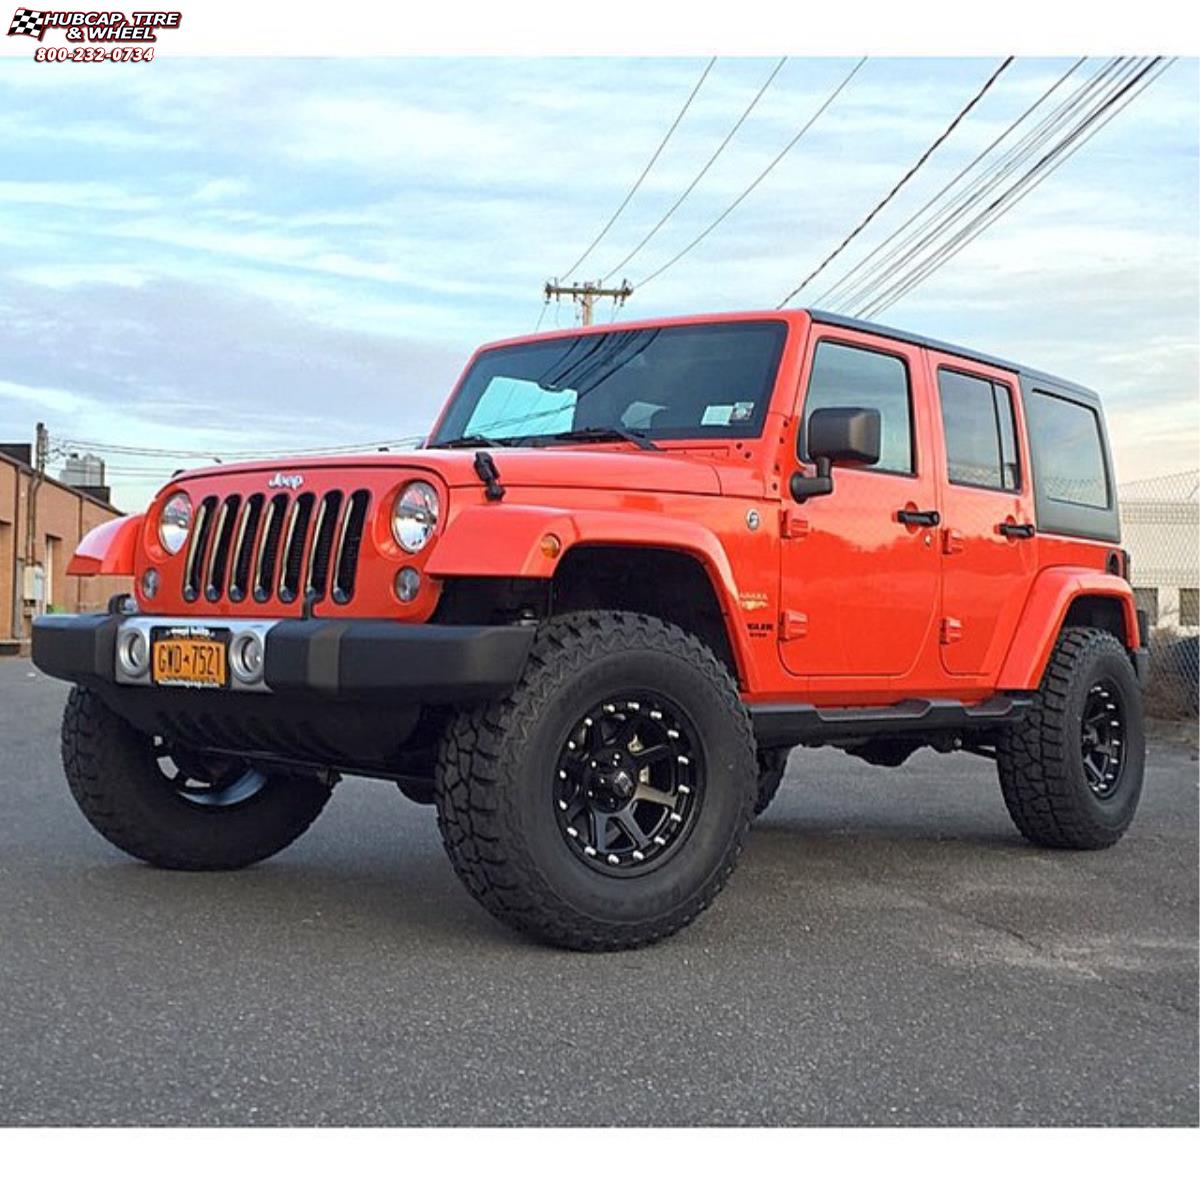 vehicle gallery/jeep wrangler xd series xd798 addict  Matte Black wheels and rims